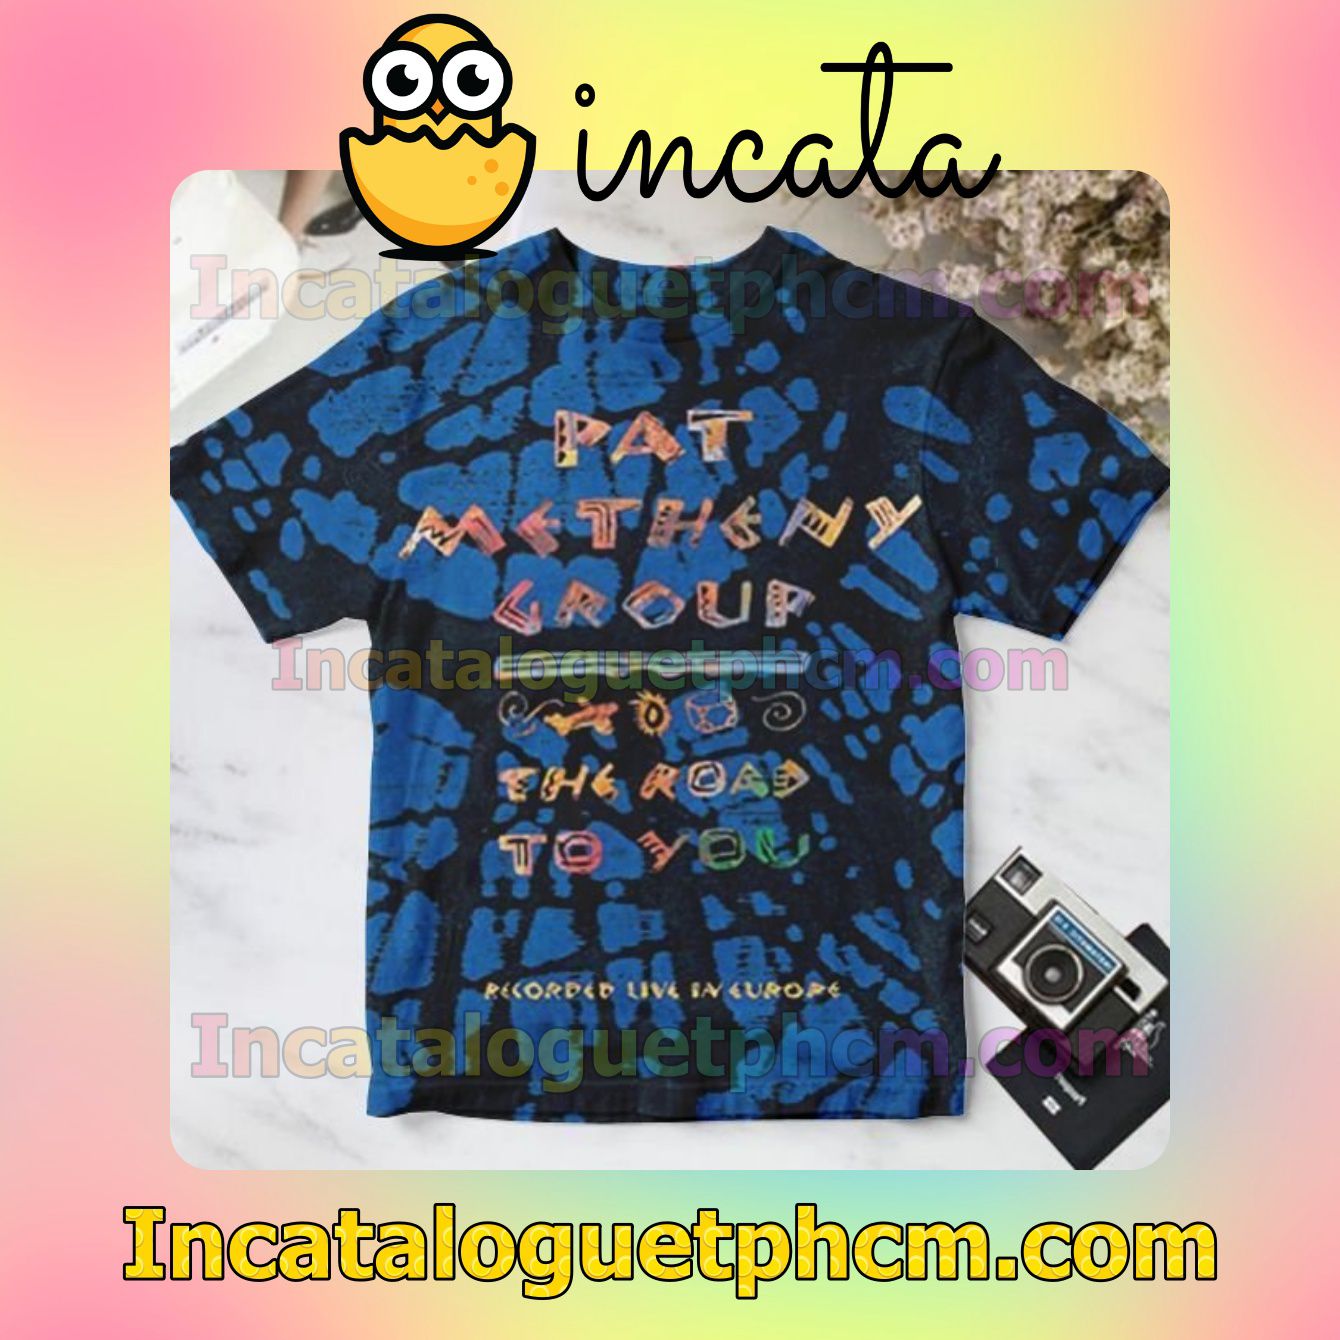 Pat Metheny The Road To You Album Cover Personalized Shirt